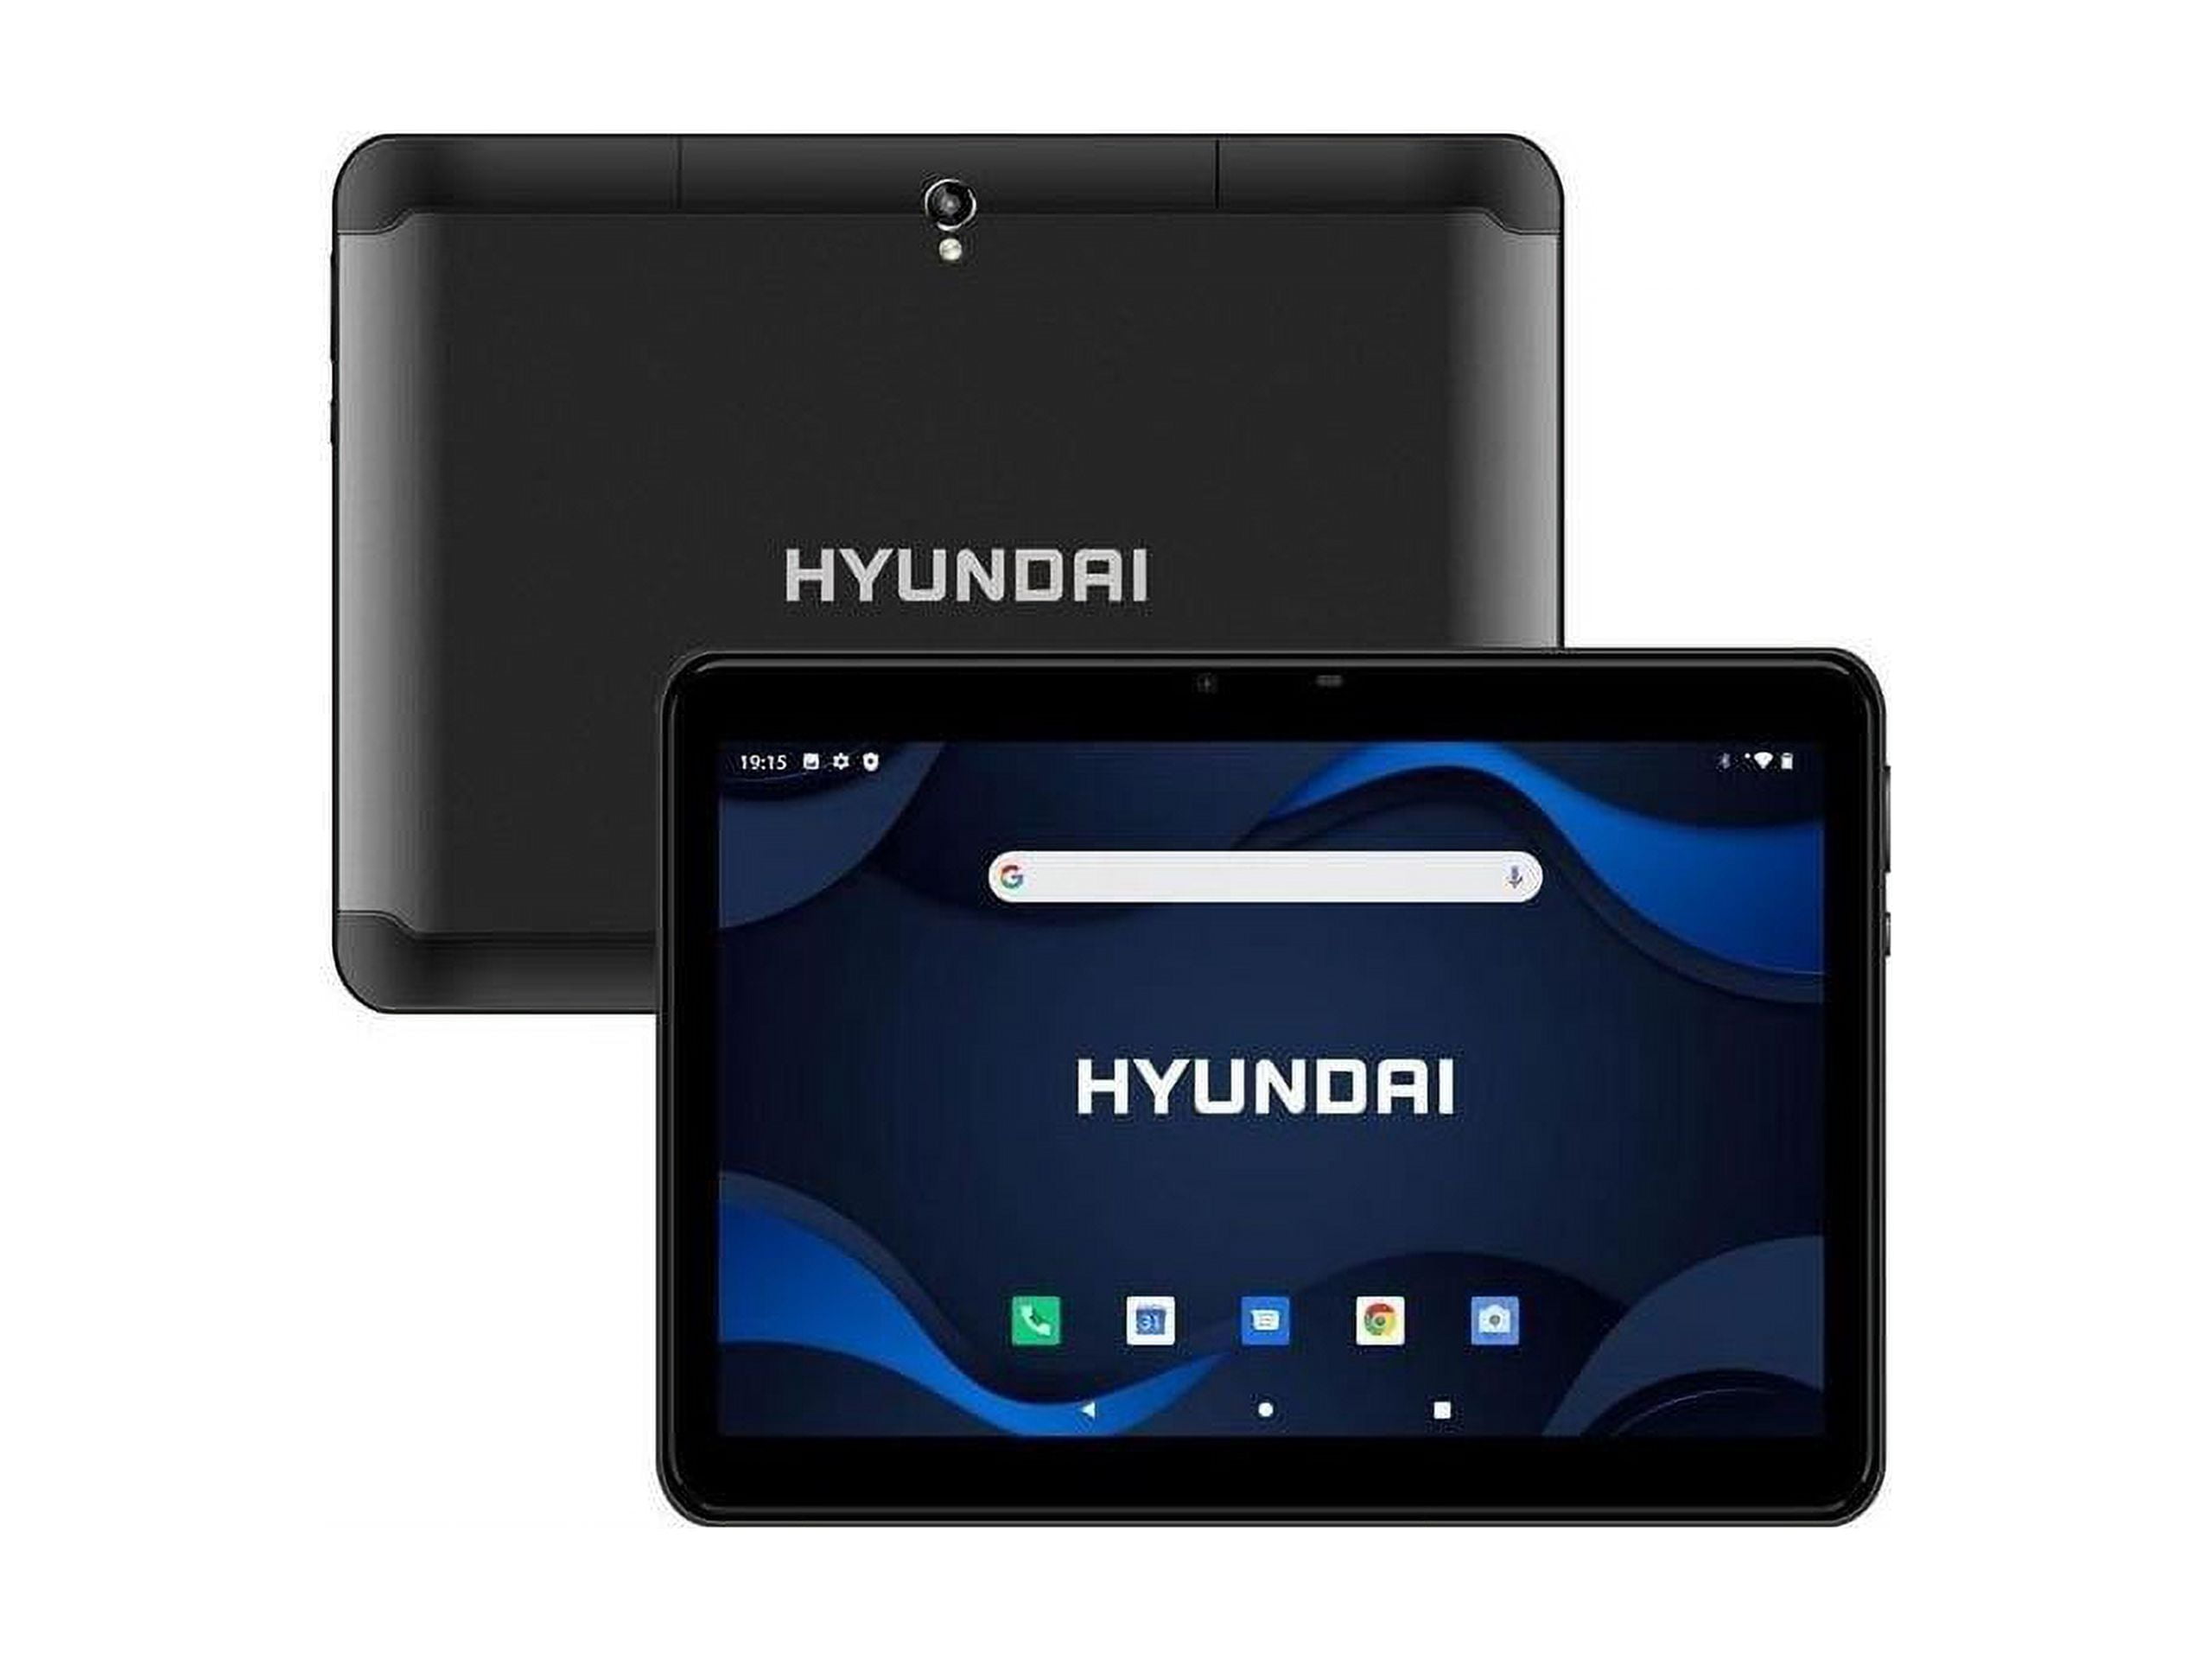 HYUNDAI HyTab Plus Tablet, 10 Inch Tablet, FHD IPS Display, 4G LTE, WiFi  Tablet, Quad-Core Processor, 2GB RAM, 32GB Storage, Dual Camera, Android 10  Go Edition Tablet, 5000 mAh Battery - Graphite 